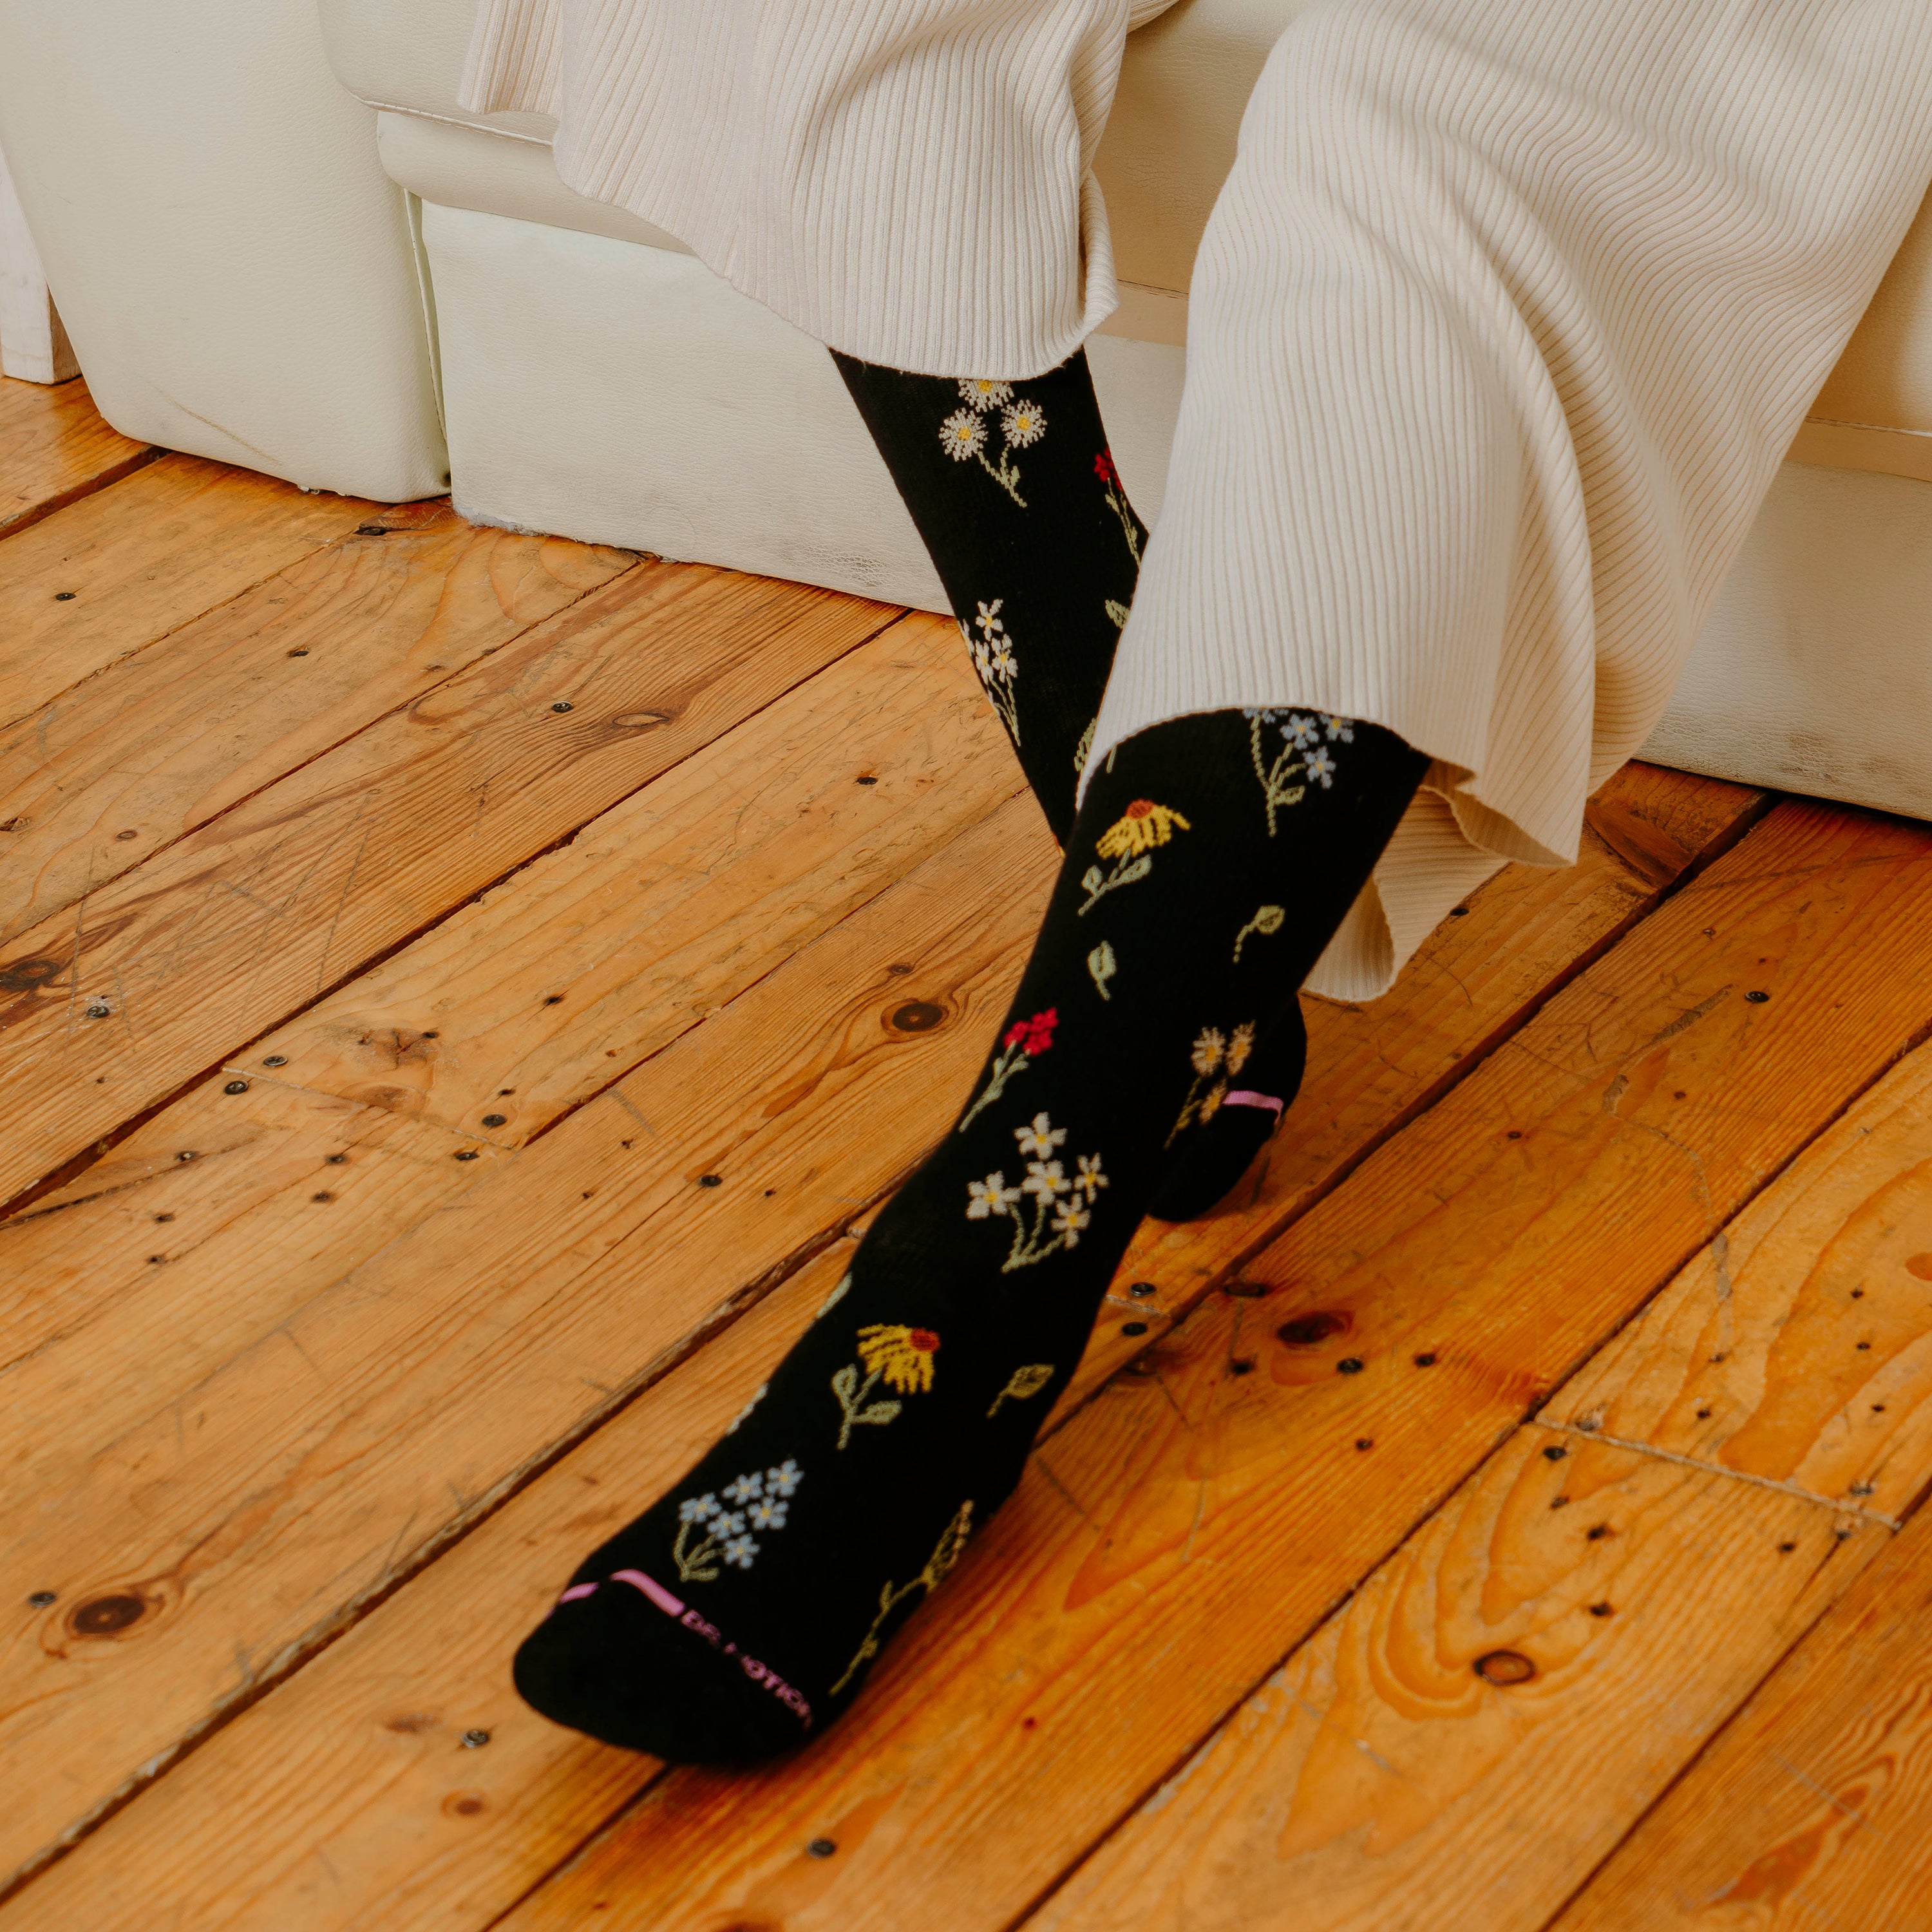 Wildflowers | Knee-High Compression Socks For Women